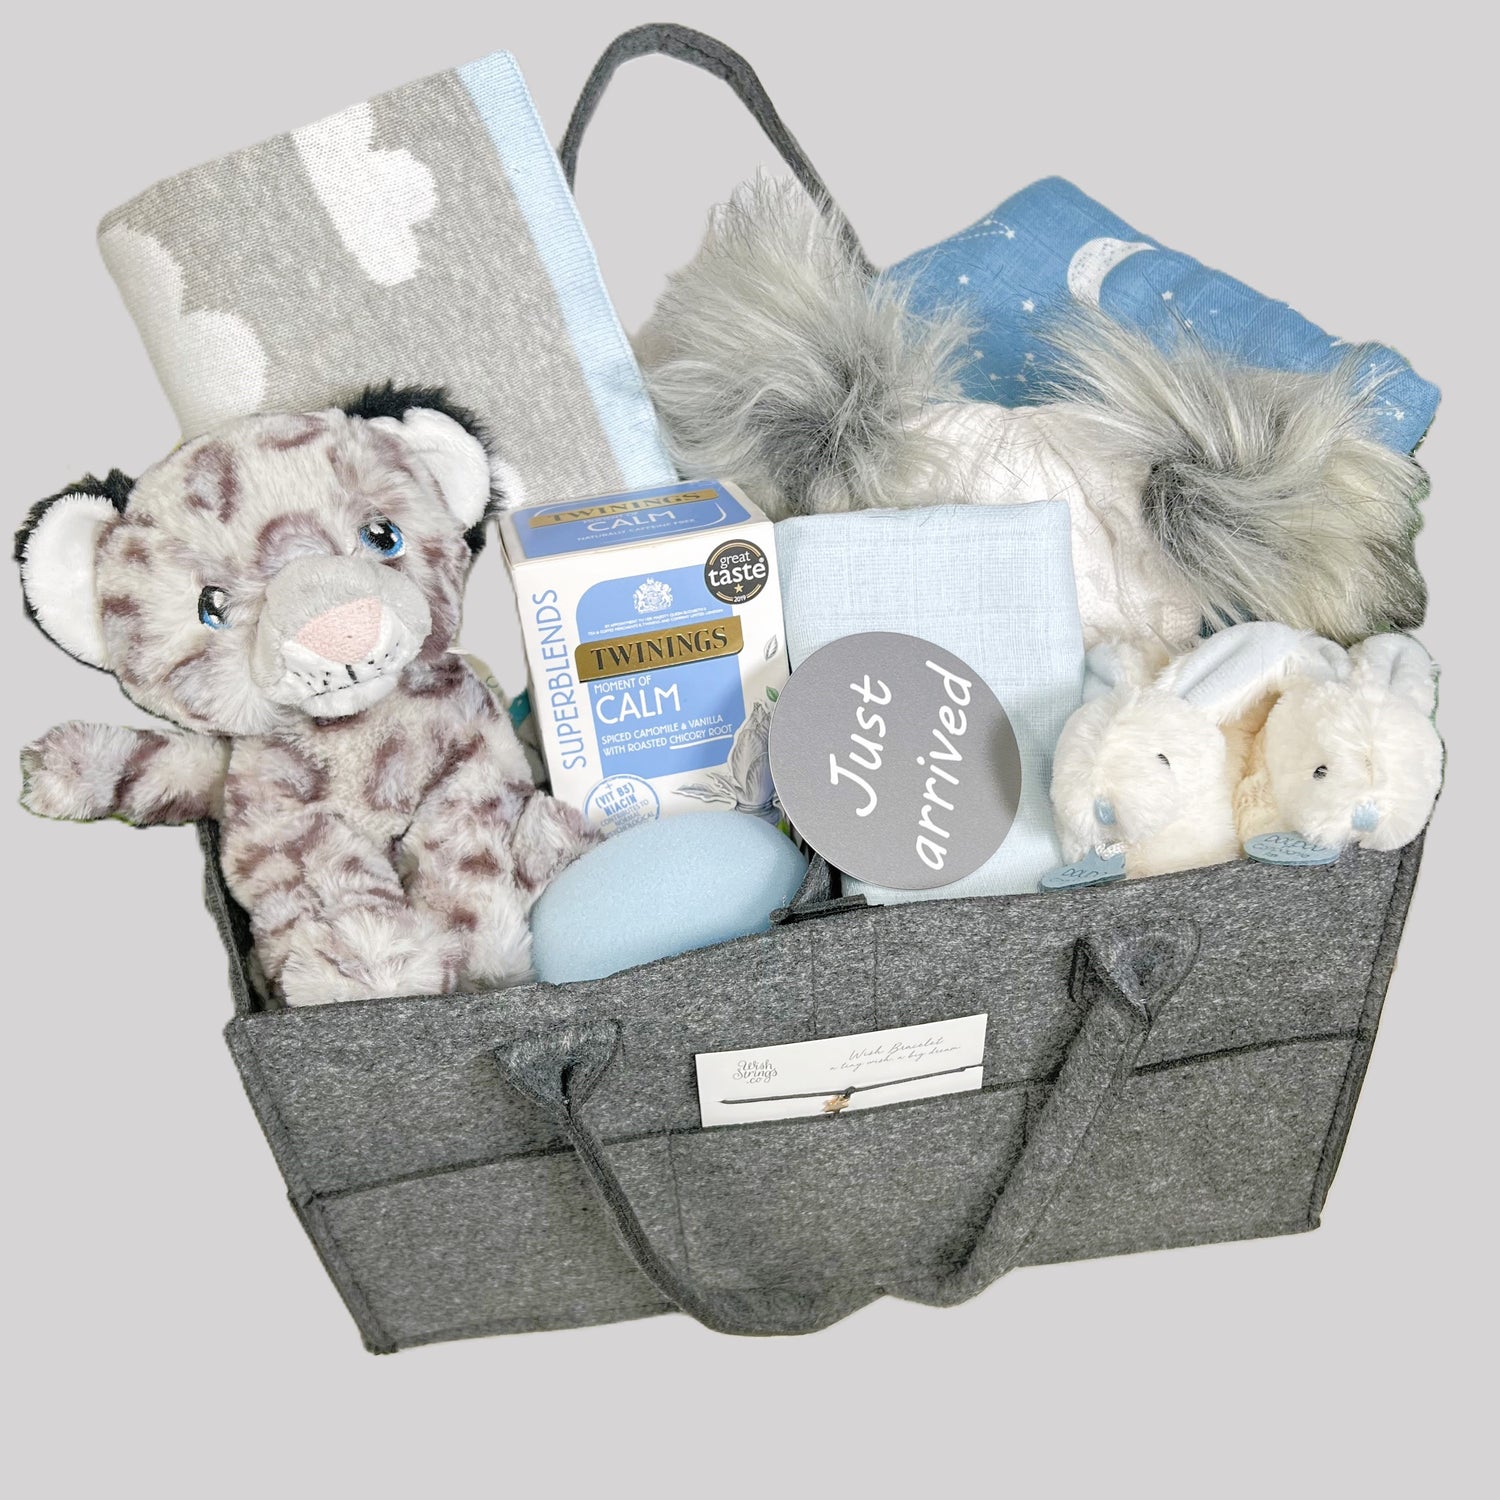 A New Baby Boy gift of a dark grey felt nappy caddy containing a cotton baby blanket in grey with a white coloud pattern and sky blue trim, a large blue baby muslin with a white print of planets, a Kelleco snowlepoard soft baby toy, a pair of Doudou Compagnie bunny baby slippers in white and blue, a grey and white baby pompom hat with two fluffy grey pompoms, a packet of Twining Calm teabags, a wish string and various plastic free baby toiletries.